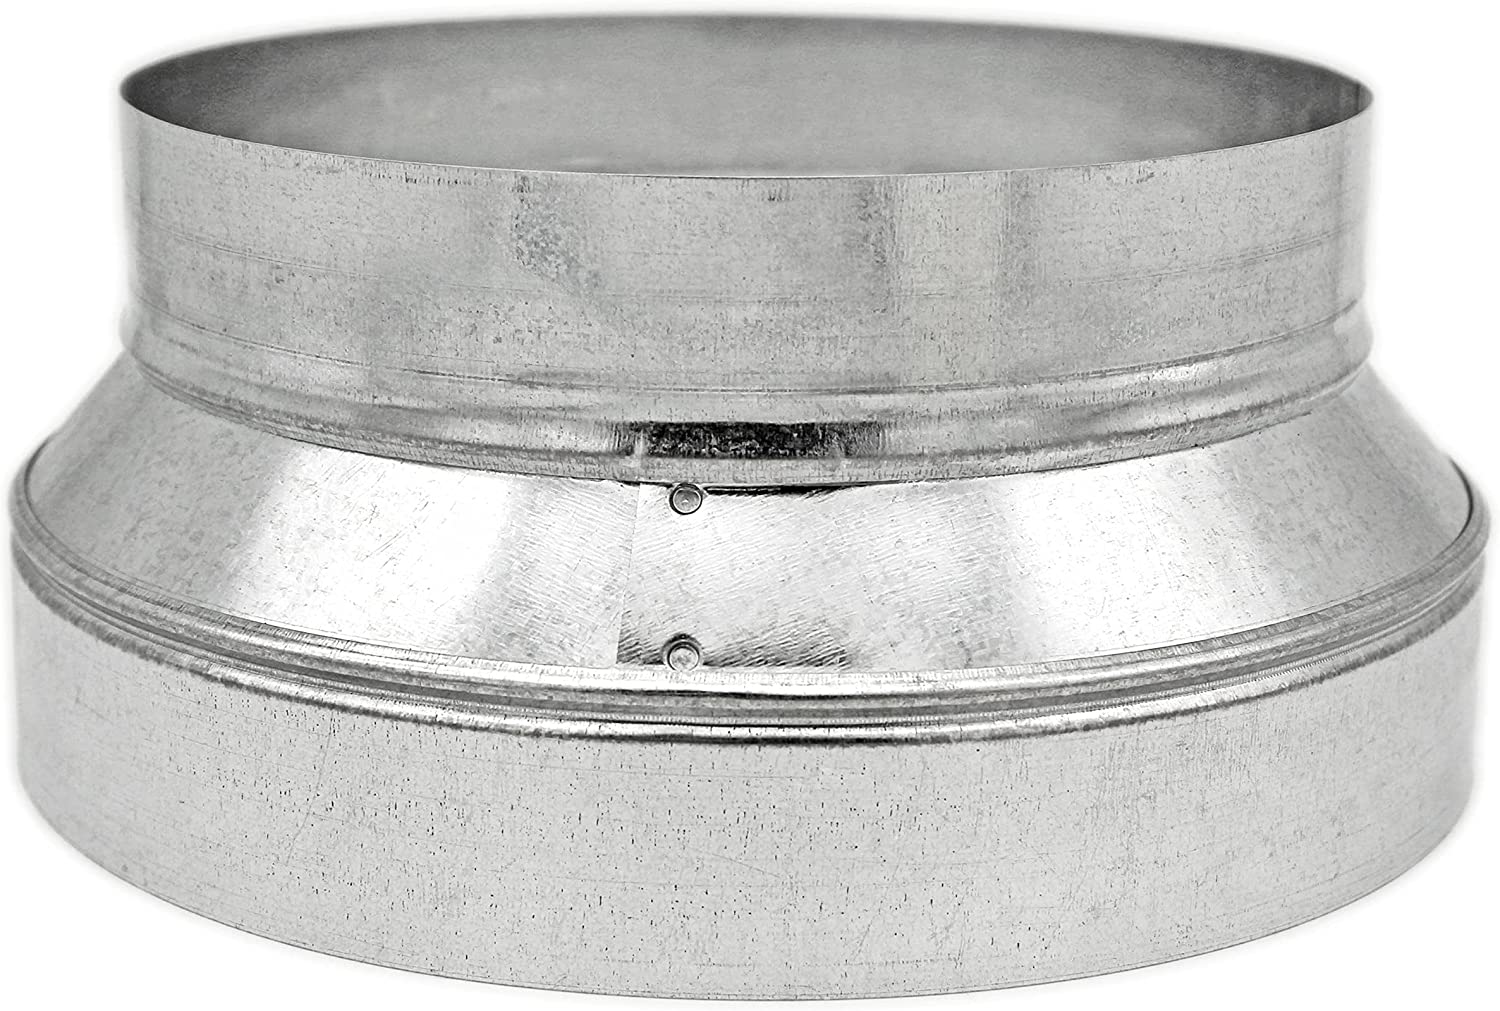 HVAC Premium Round Metal Pipe Reducer & Increaser | 6" to 4" HVAC Duct Reducer or Increaser 30g Gauge | Galvanized Sheet Metal Ducting Connector is Compatible with Duct 4"